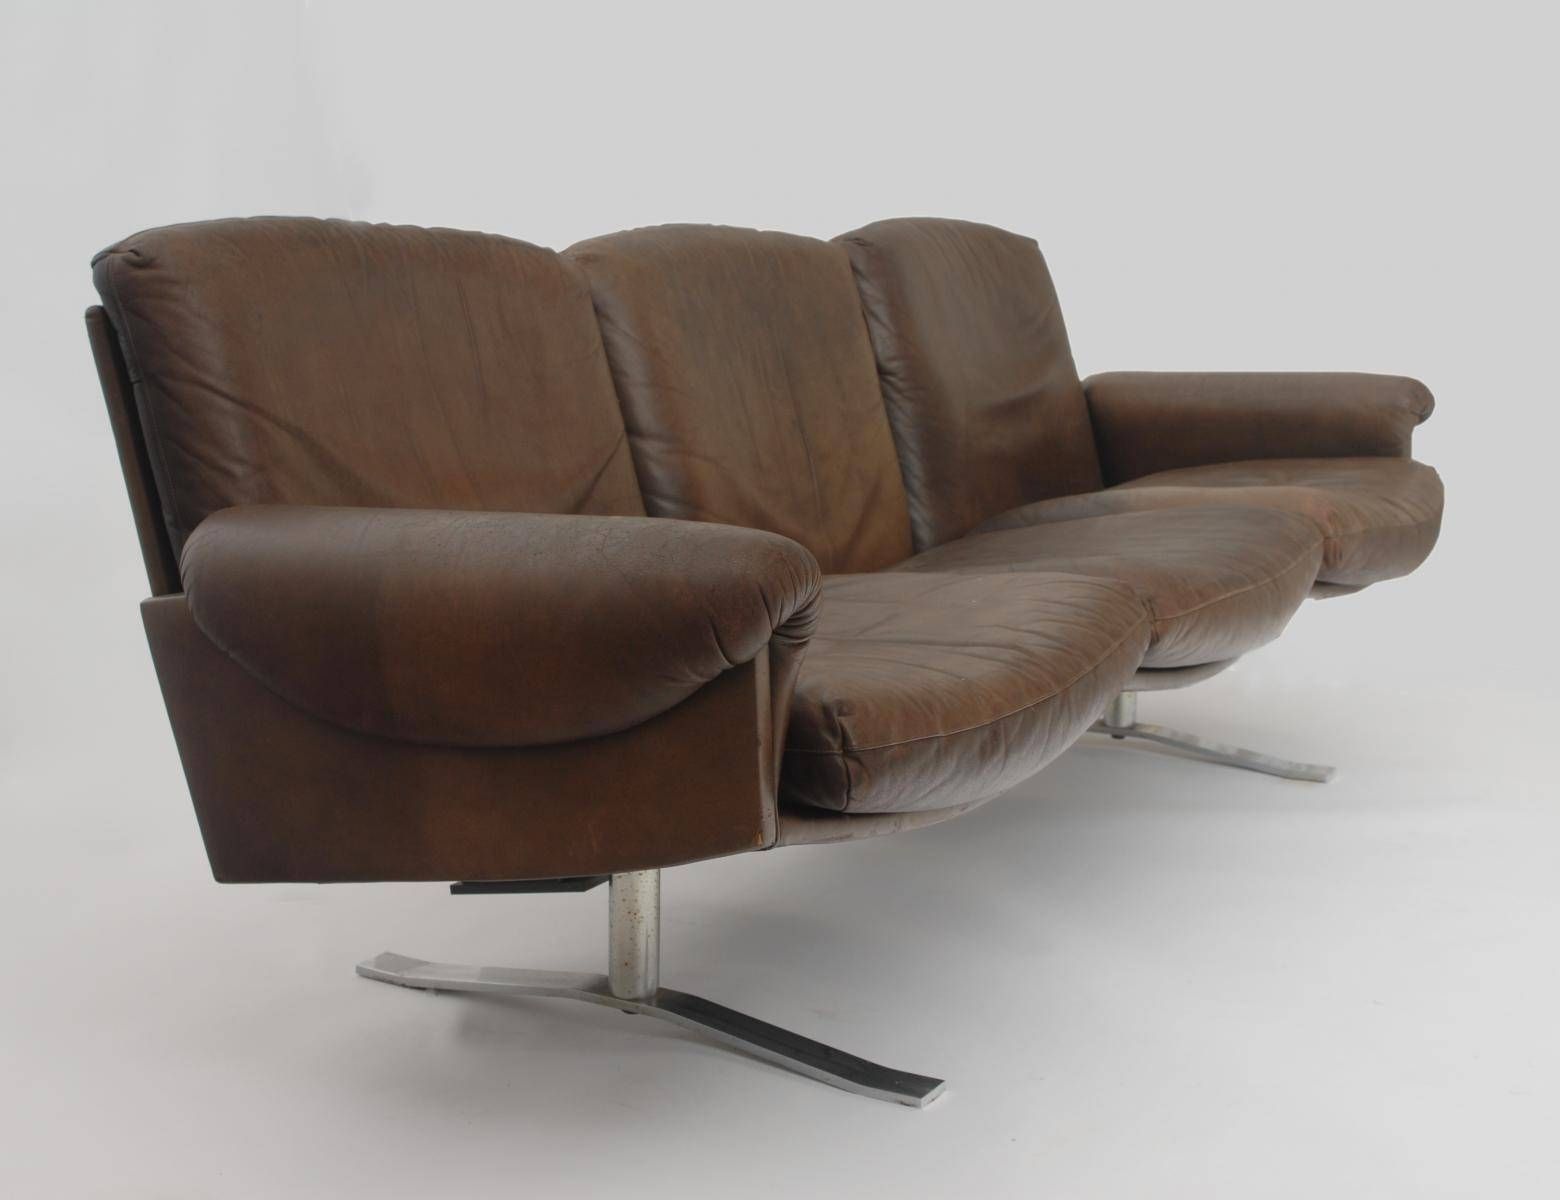 Mid Century German 3 Seater Leather Sofa For Sale At Pamono Throughout 3 Seater Leather Sofas (View 19 of 30)